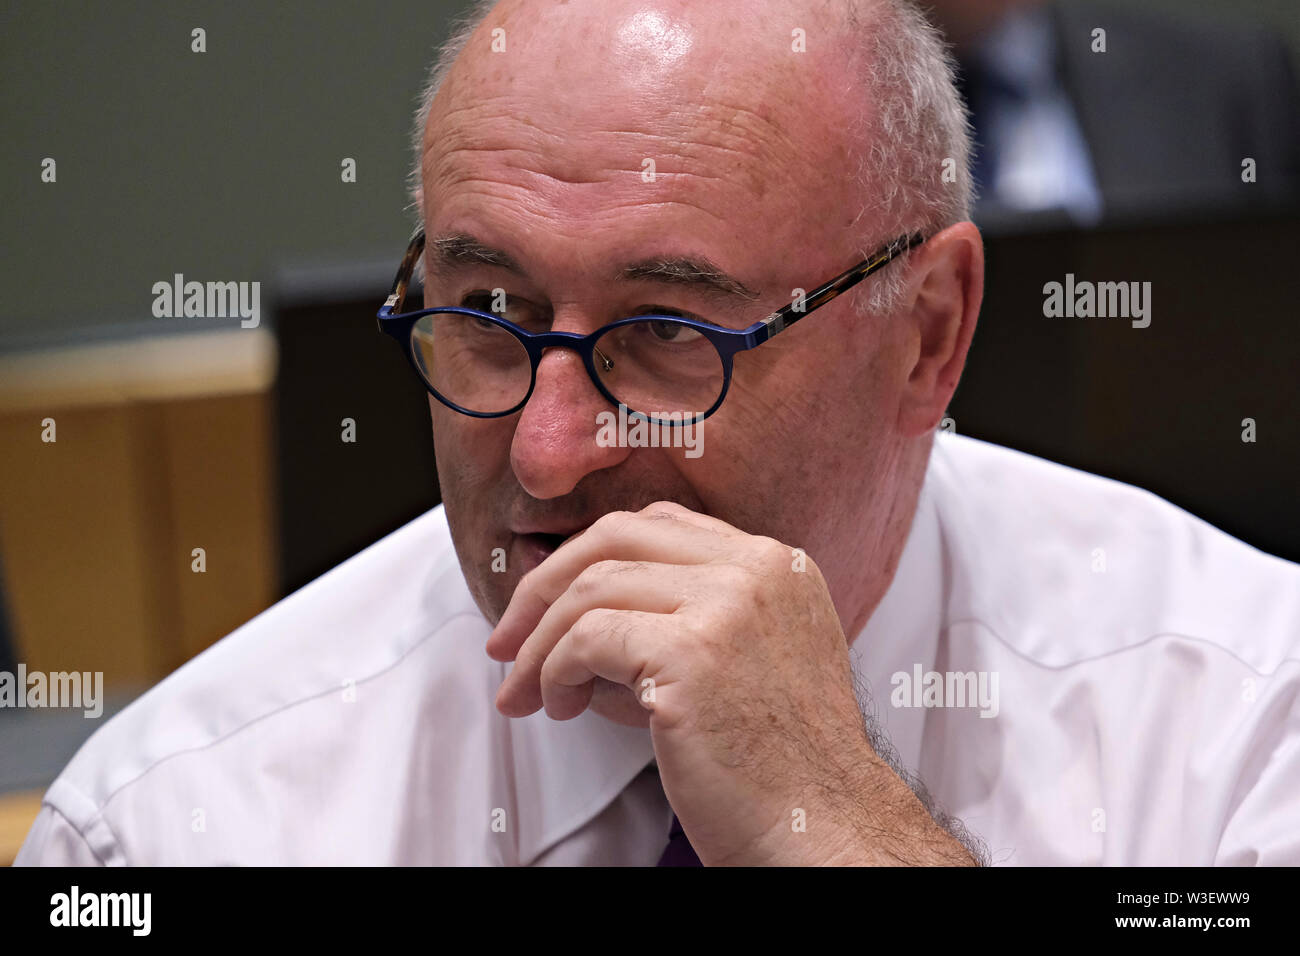 Brussels, Belgium, 15th July 2019. Phil HOGAN, EU Commissioner   attends in an European Union agriculture and fisheries council meeting. Credit: ALEXANDROS MICHAILIDIS/Alamy Live News Stock Photo